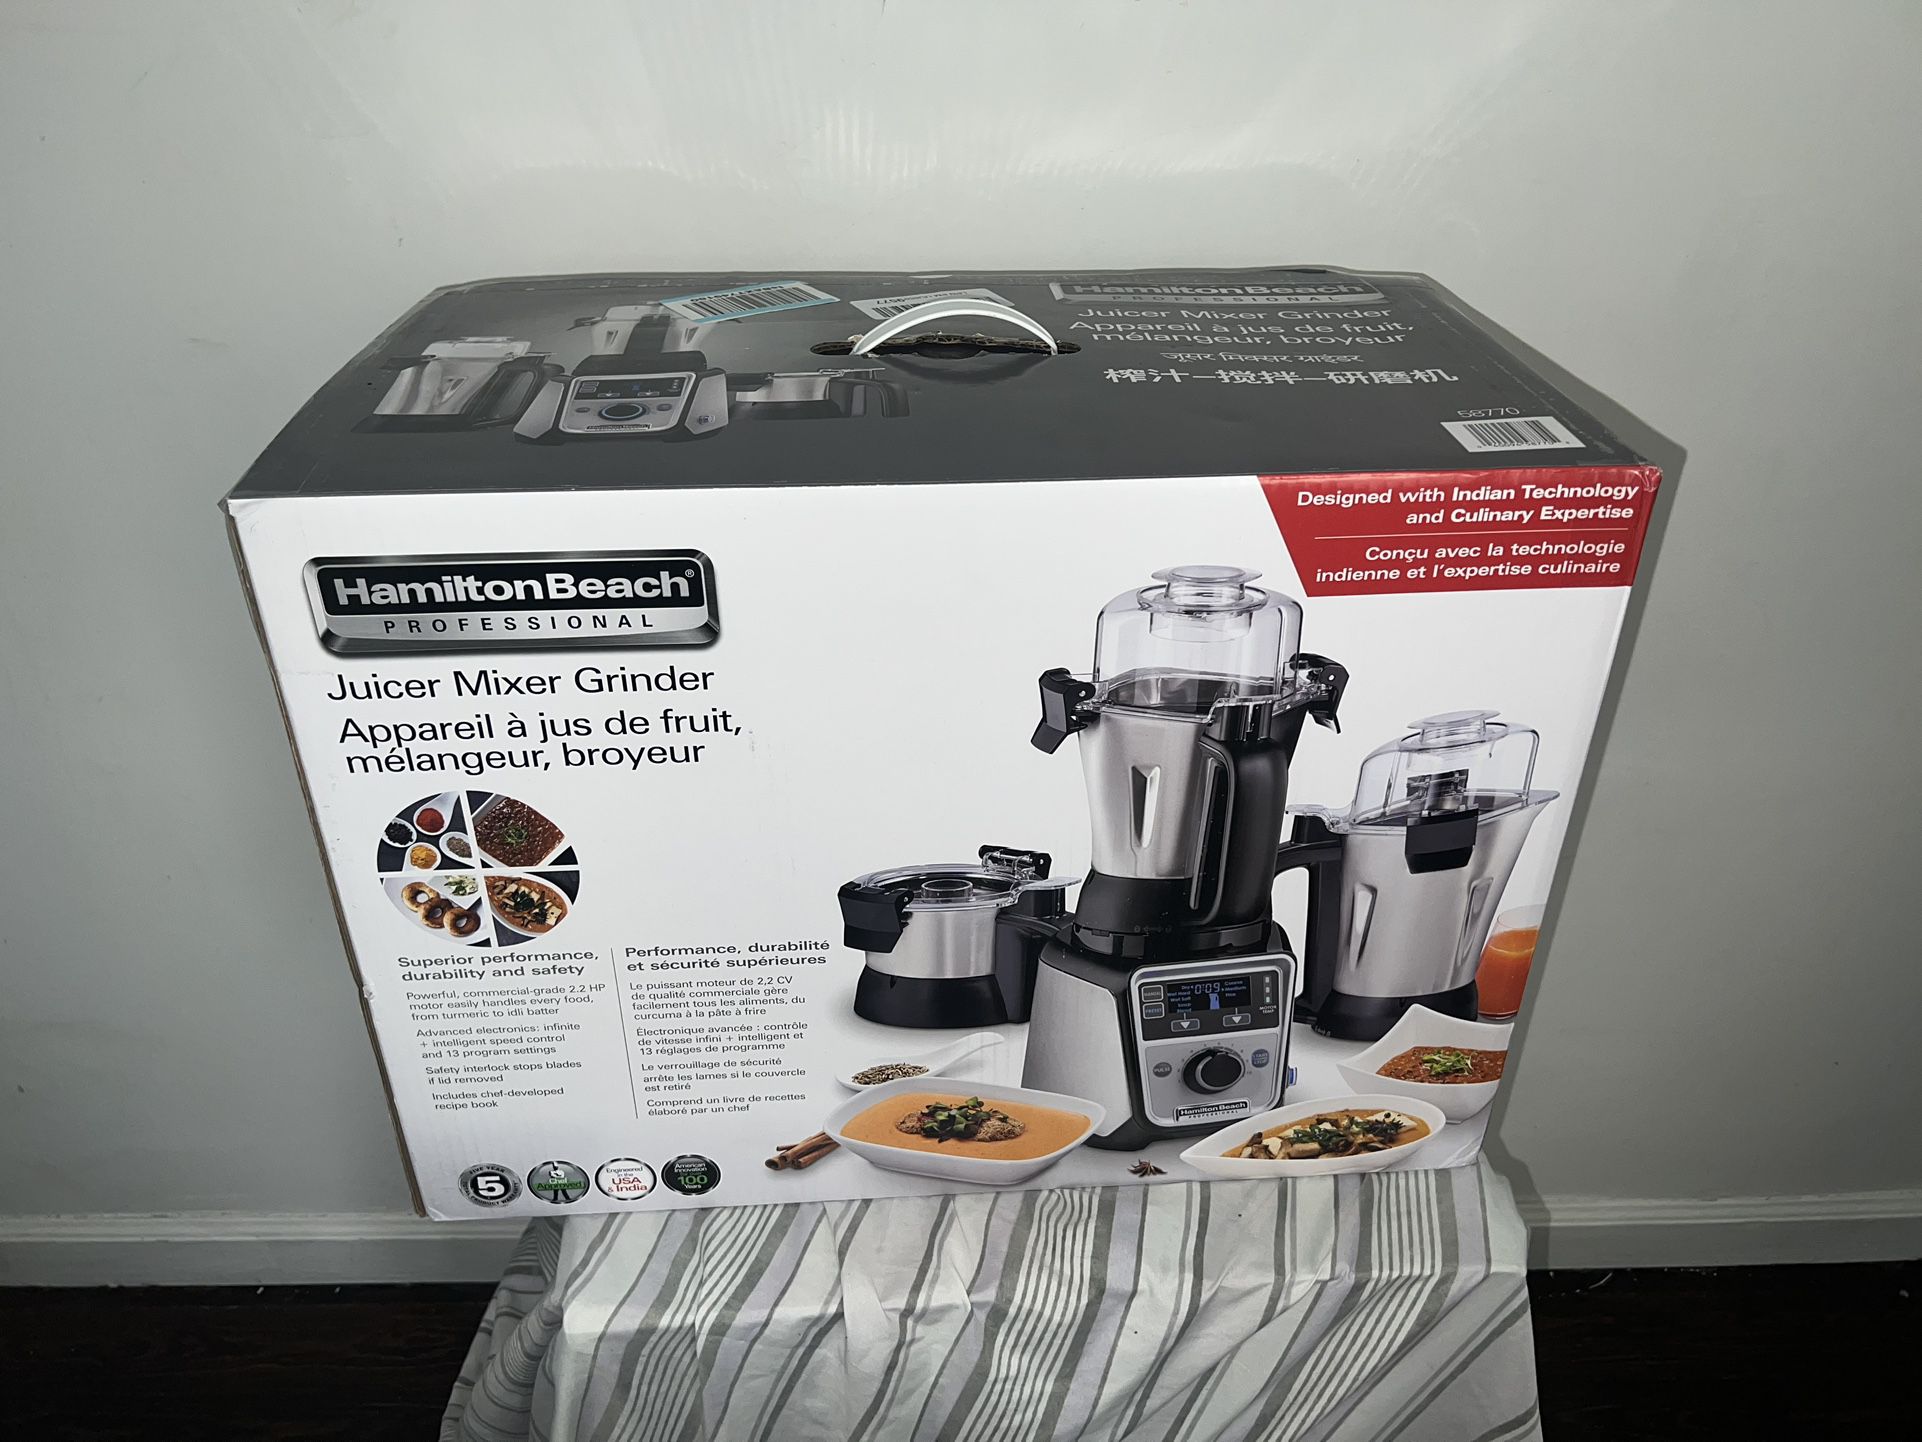 Hamilton Beach Professional 4-in-1 Juicer Mixer Grinder for Sale